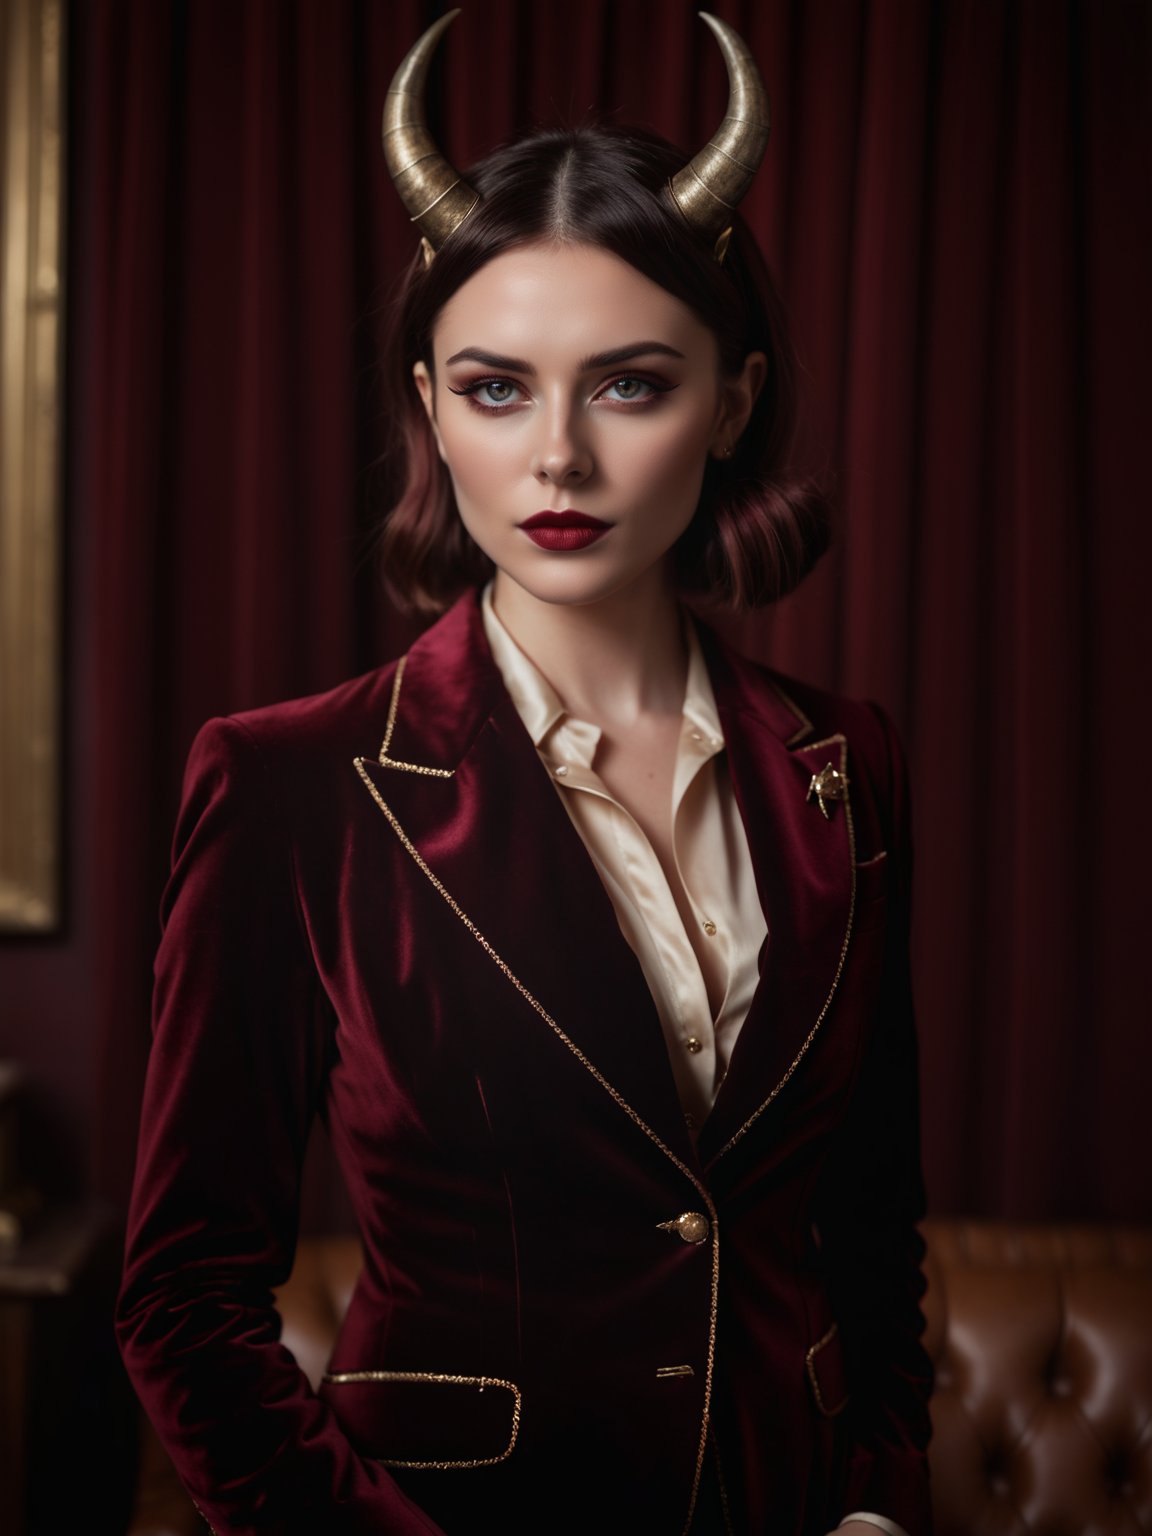 (Highest Quality, 4k, masterpiece, Amazing Details:1.1), (Shallow Depth of Field), Create a fantasy-themed portrait with a demon 25yo girl character exuding a vintage charm. The model has subtle horns and a captivating gaze, dressed in a (velvet vintage suit:1.5) with (satin accents:1.3). Set against a (deep burgundy background:1.2), use (dramatic side lighting:1.5) to cast intriguing shadows, and add a touch of (film grain:1.3) for an old-world feel. The pose should be commanding yet elegant, emphasizing the character's dual nature, (photorealistic) (RAW Photo)